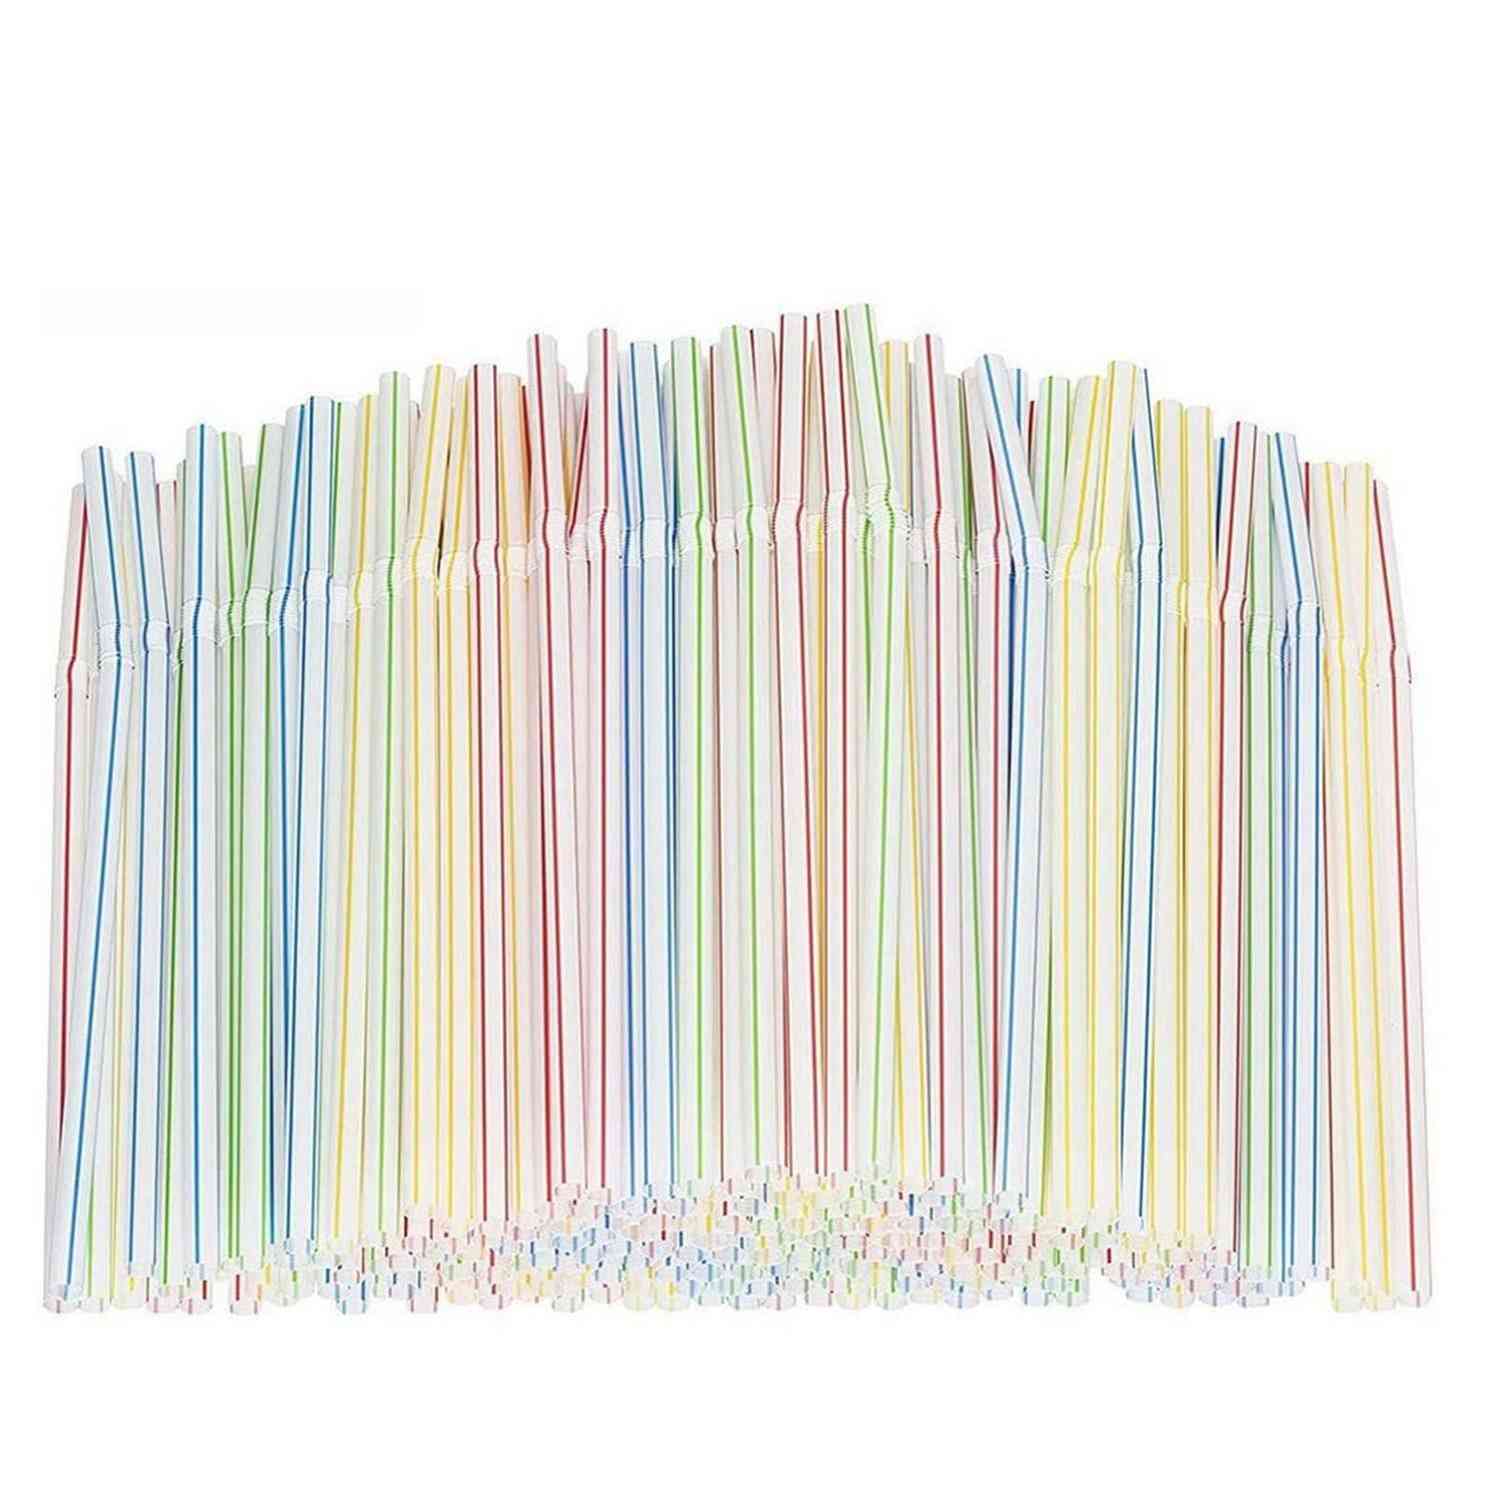 Plastic Drinking Straws 8 Inches Long Multi-colored Disposable Straws